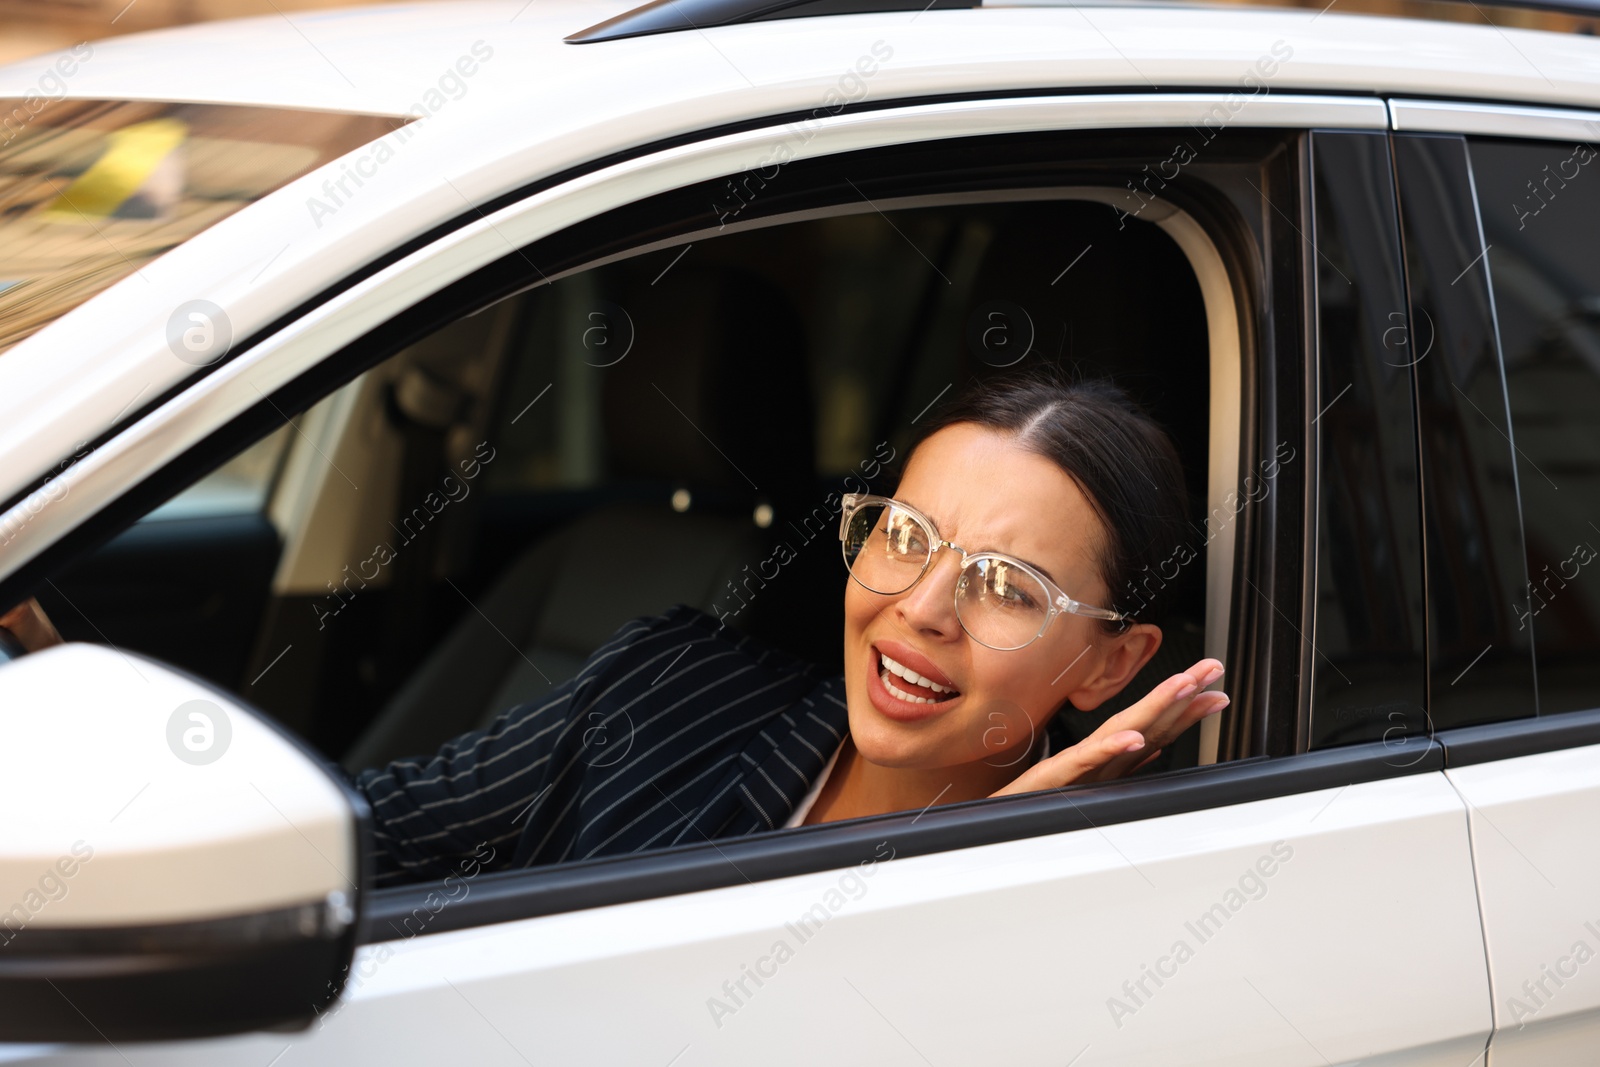 Photo of Stressed driver screaming in her car. Stuck in traffic jam